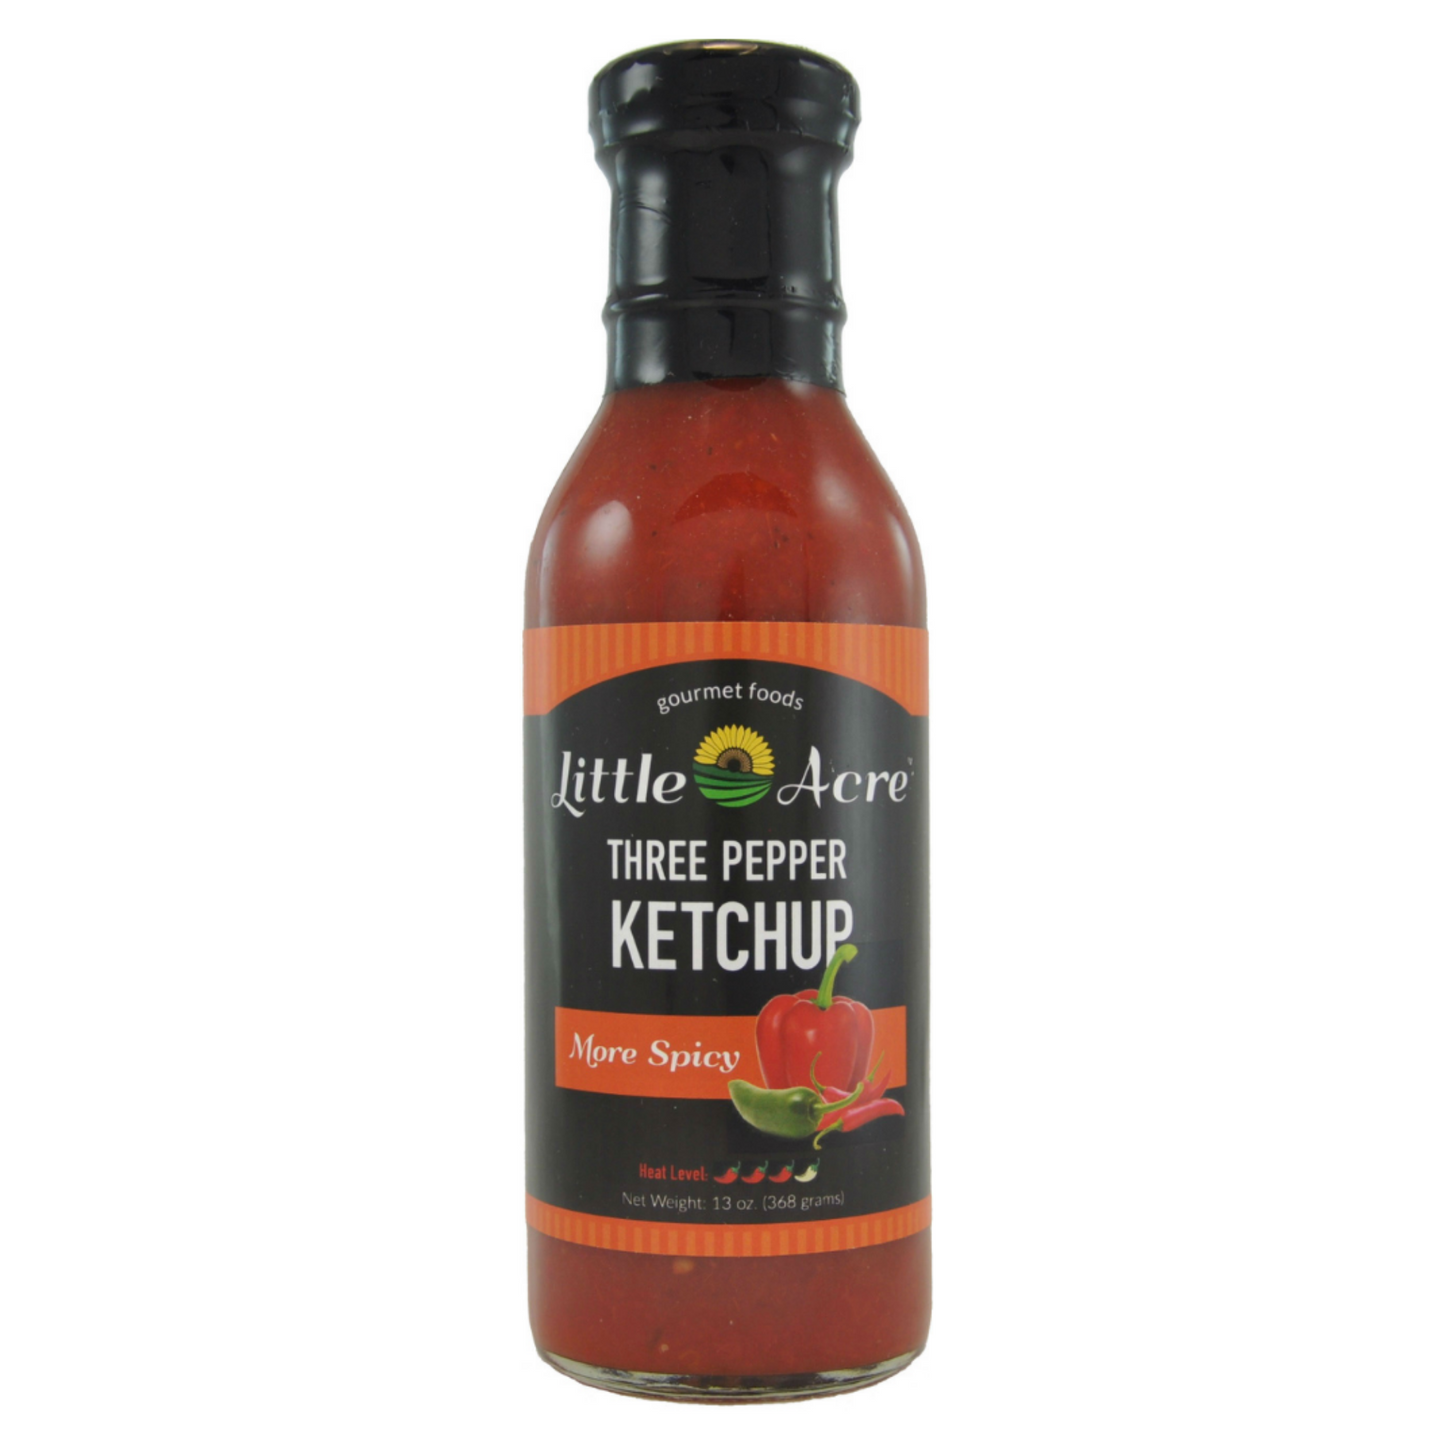 Three Pepper Ketchup More Spicy- Little Acre Online